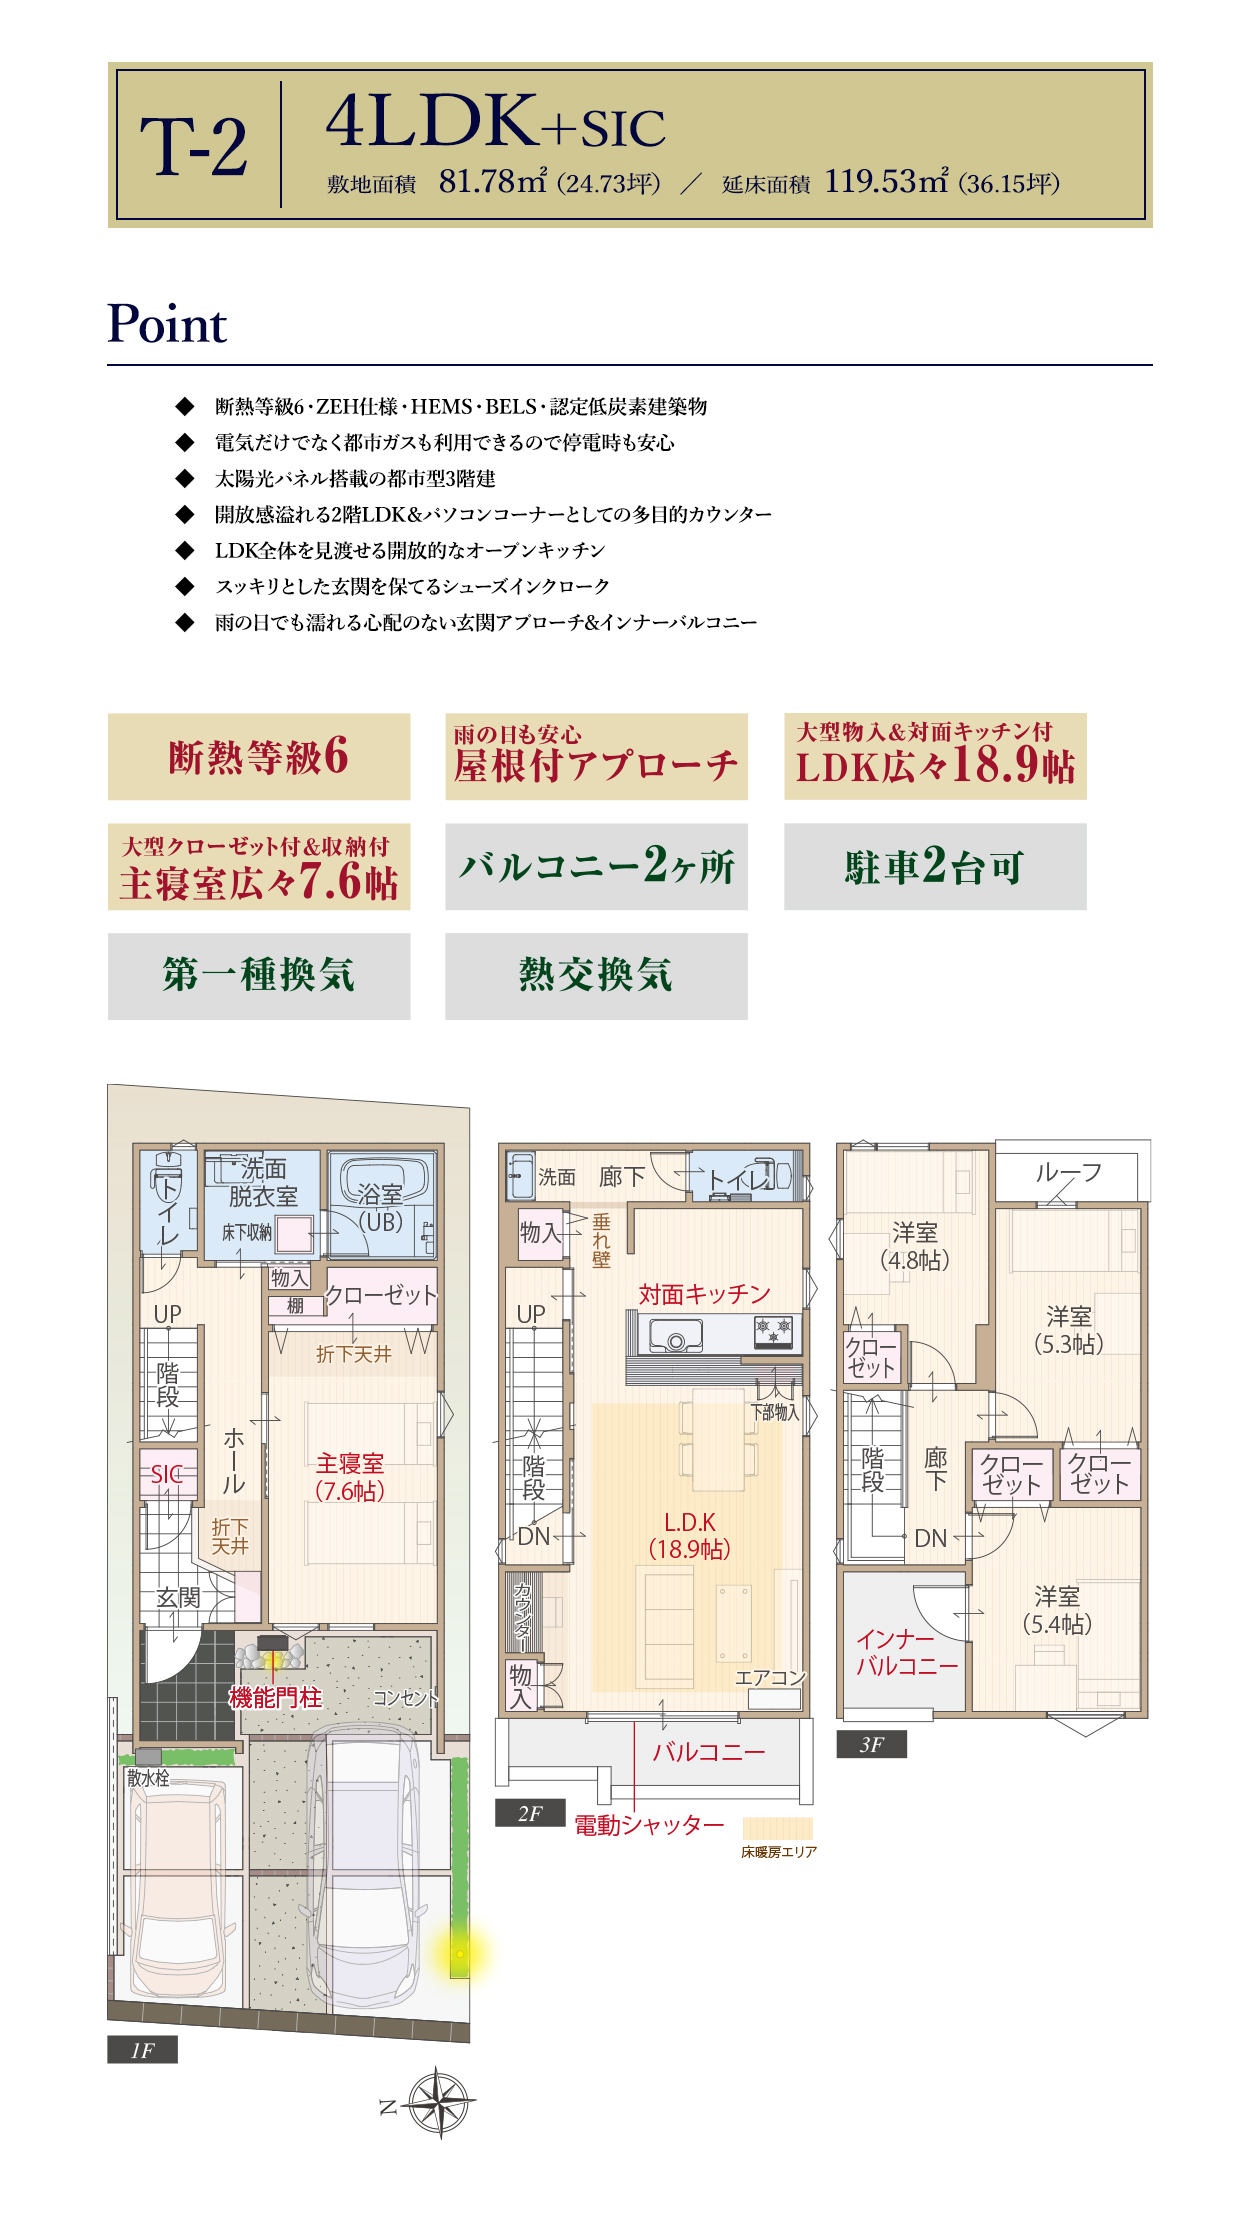 East Park Front　西区上小田井　T-2　間取り図